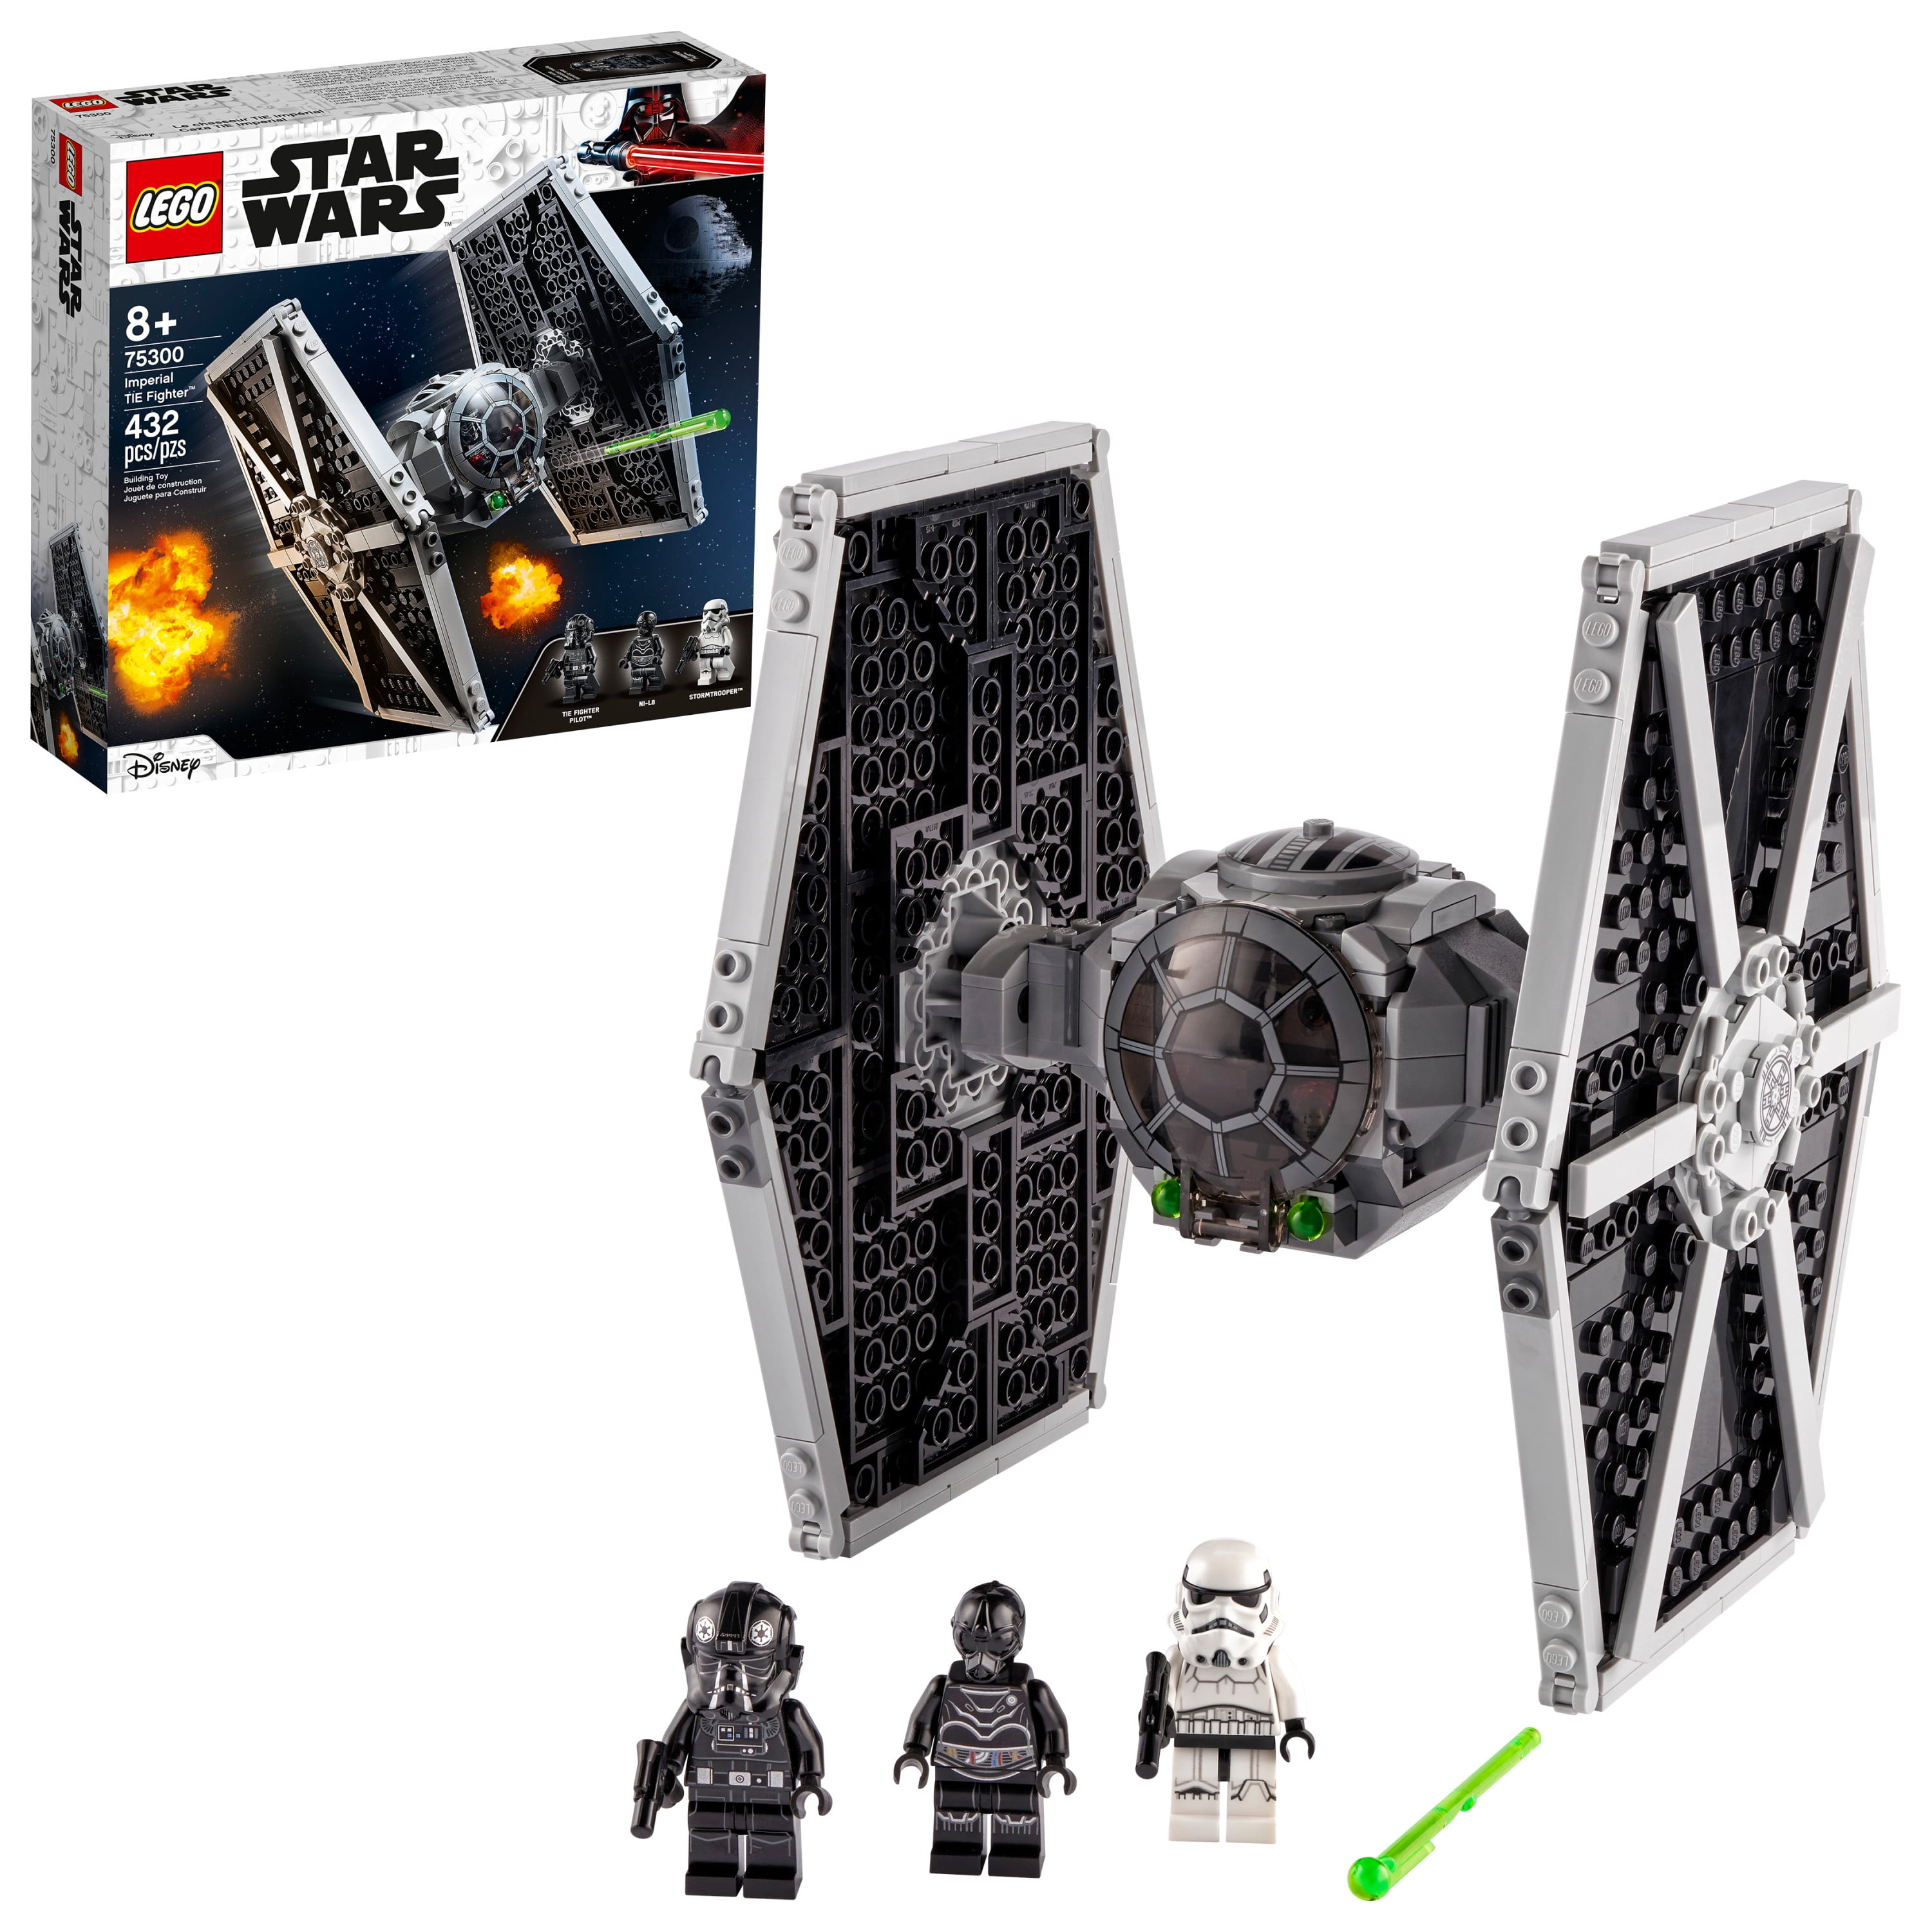 for sale online LEGO Star Wars Imperial TIE Fighter 75300 Building Kit 432 Pieces